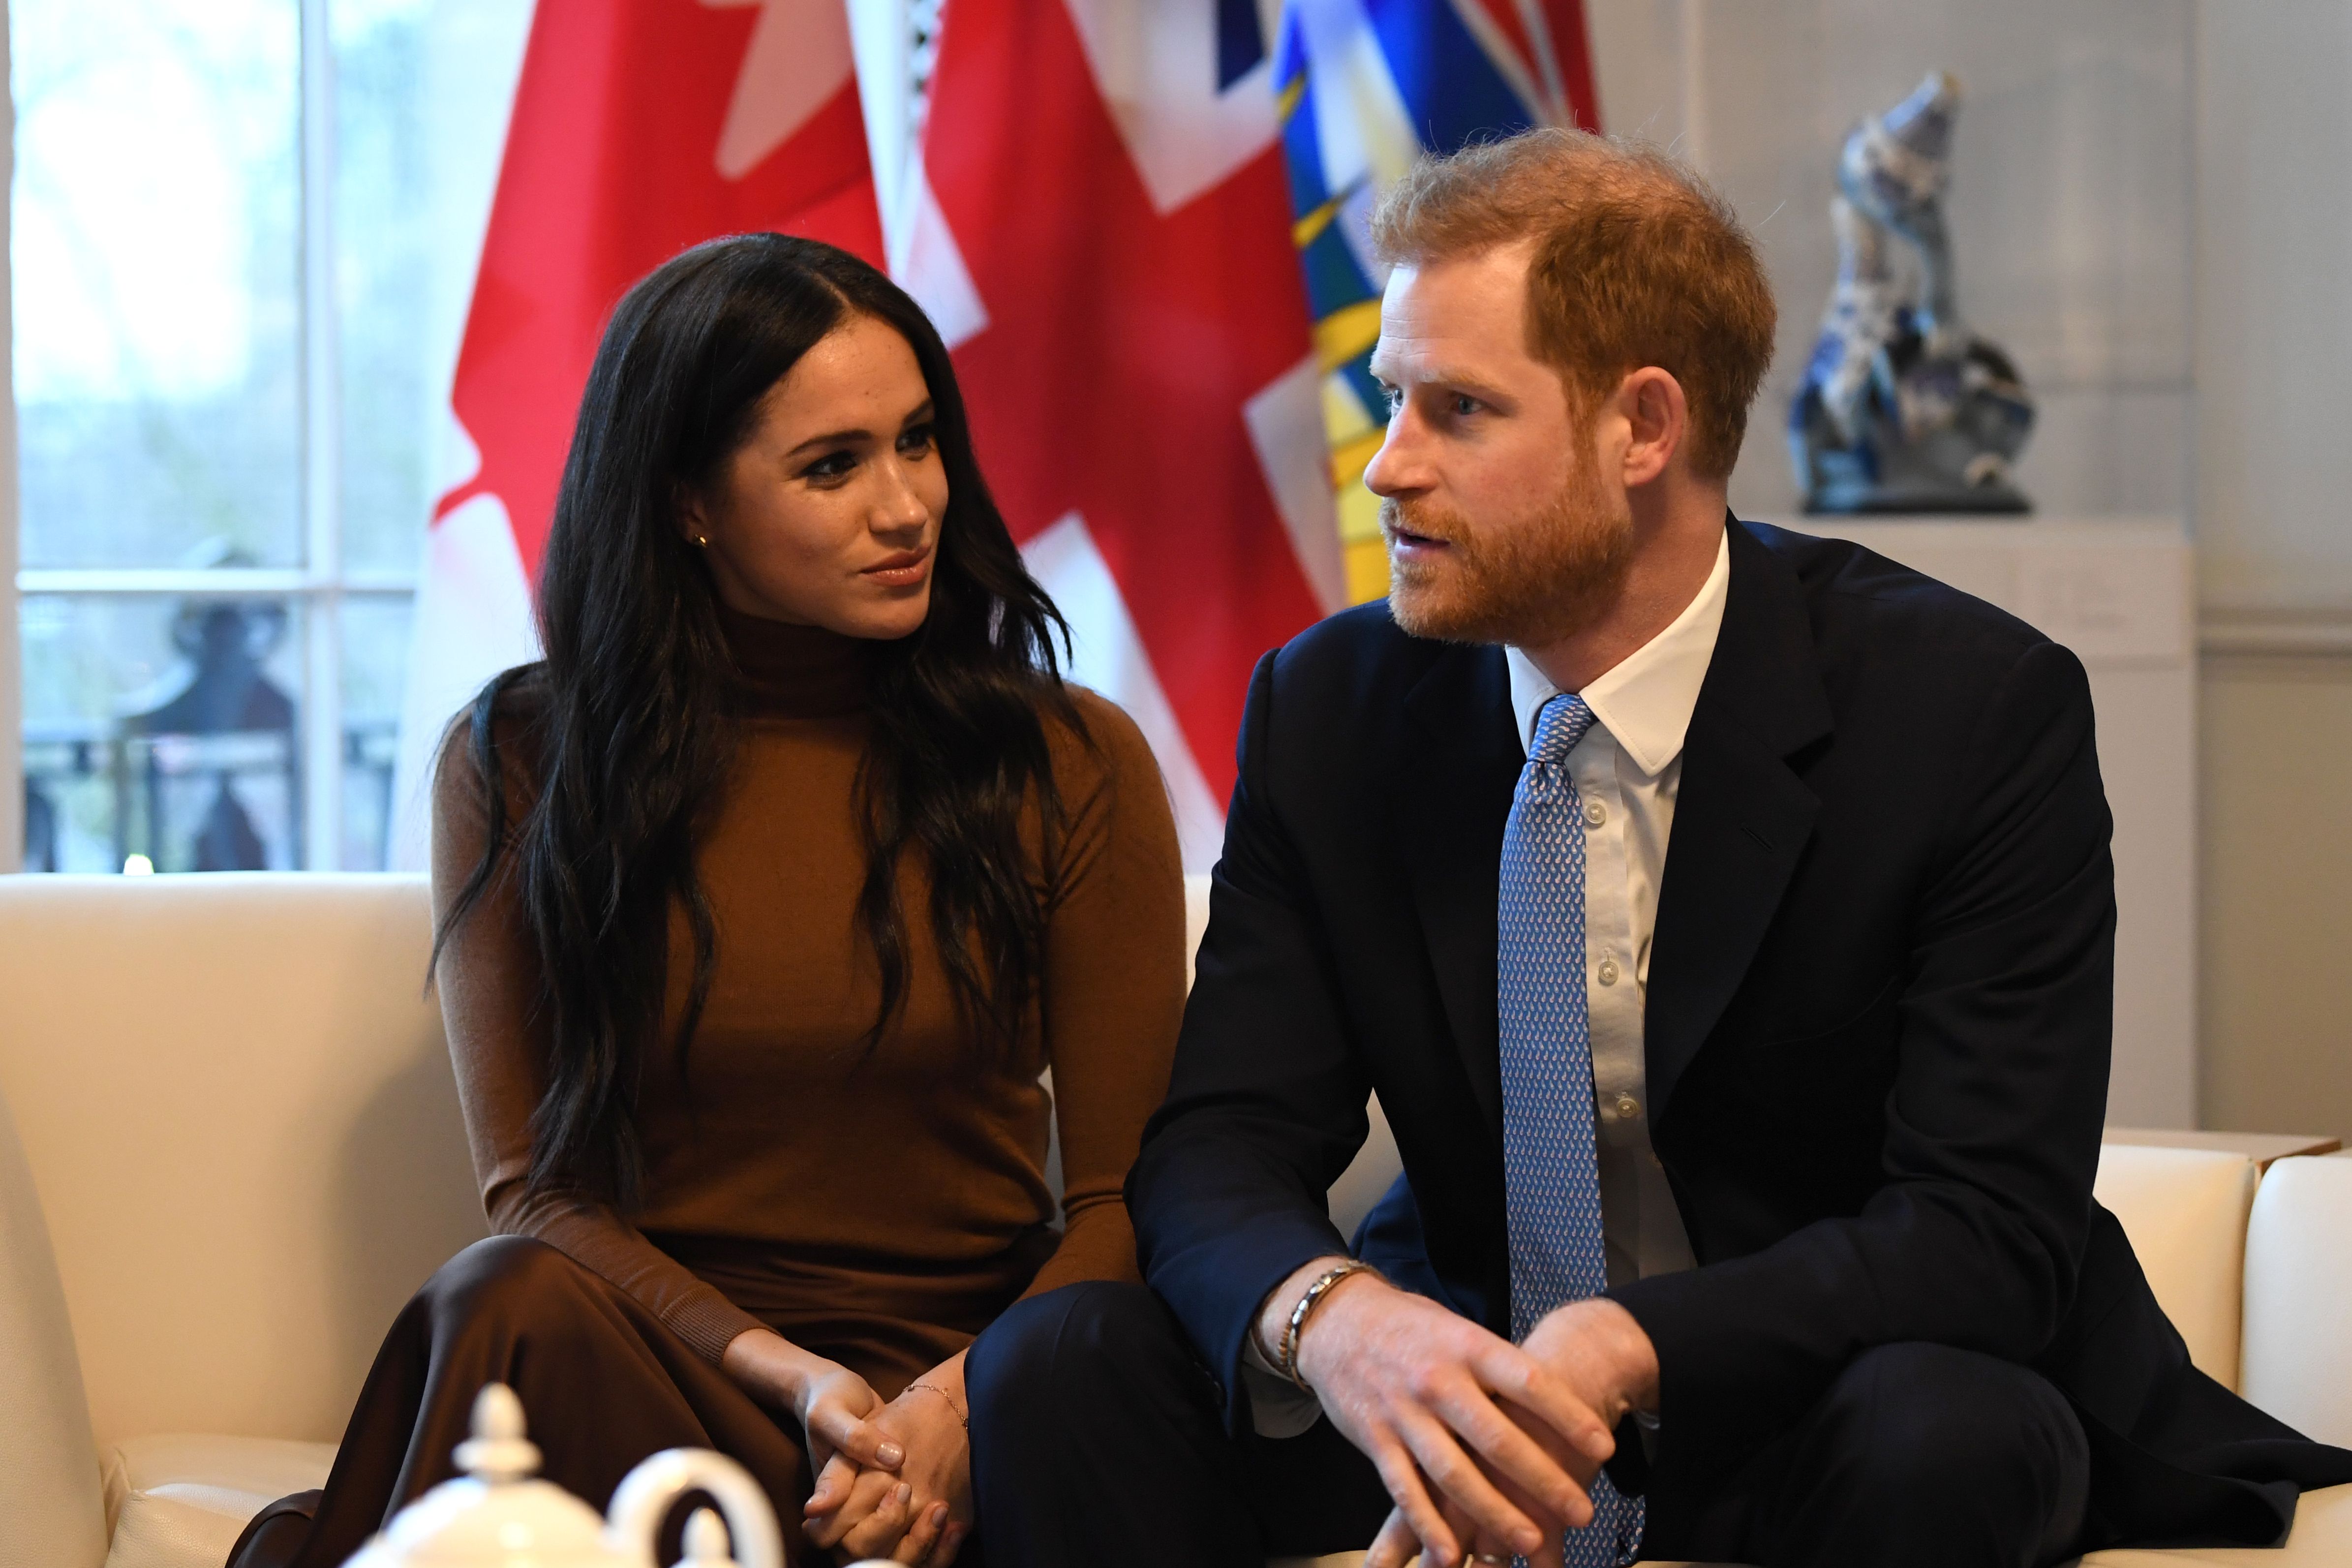 Prince Harry and Meghan Markle during their visit to Canada House on January 7, 2020 | Photo: Getty Images